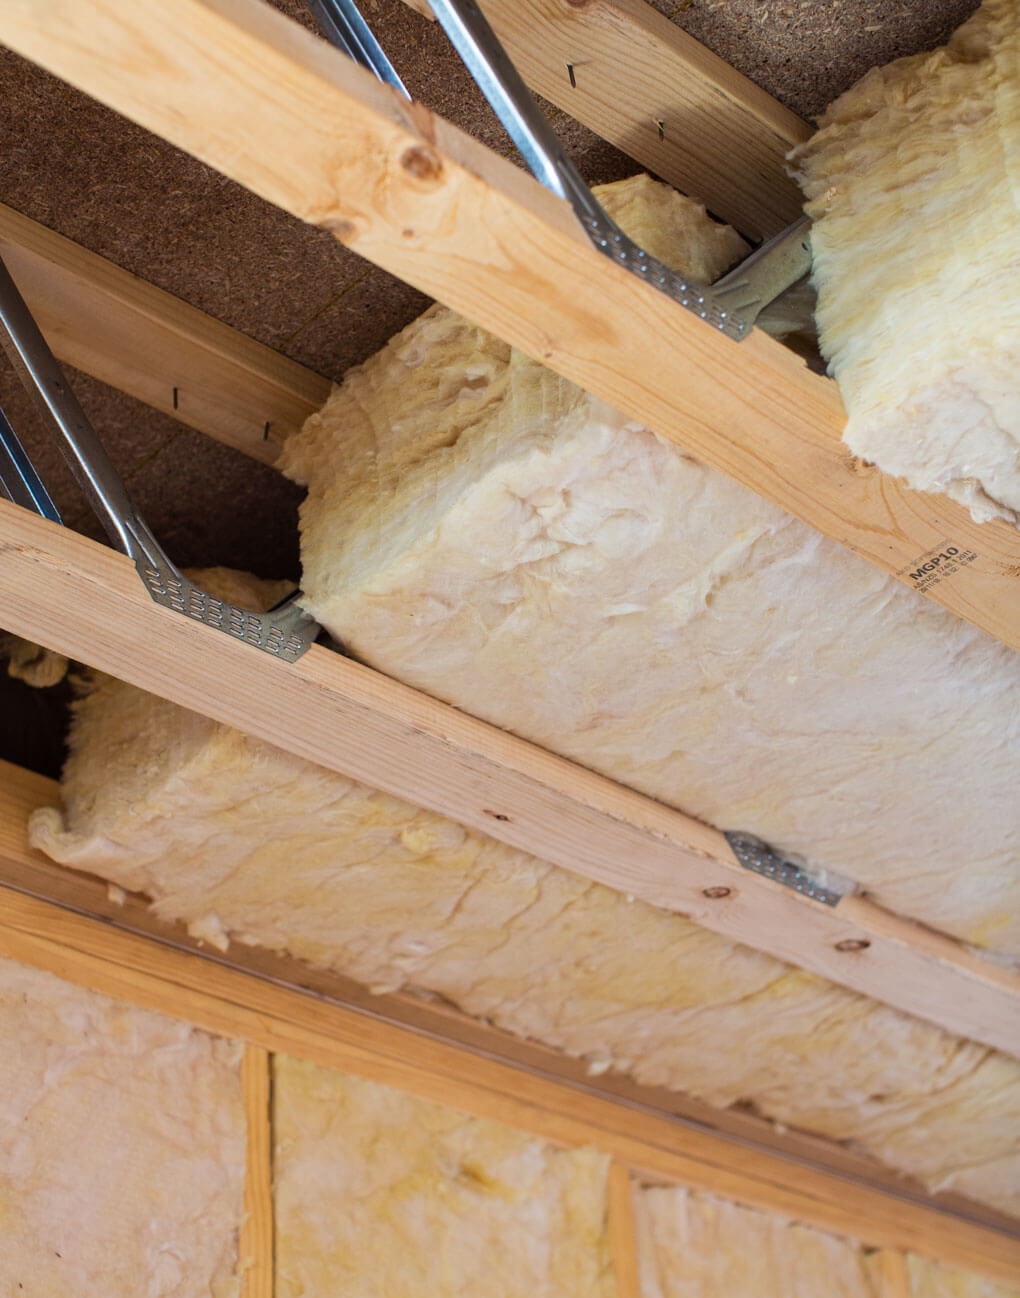 Buy Bradford Gold Insulation Online - Acoustic Roof Insulation